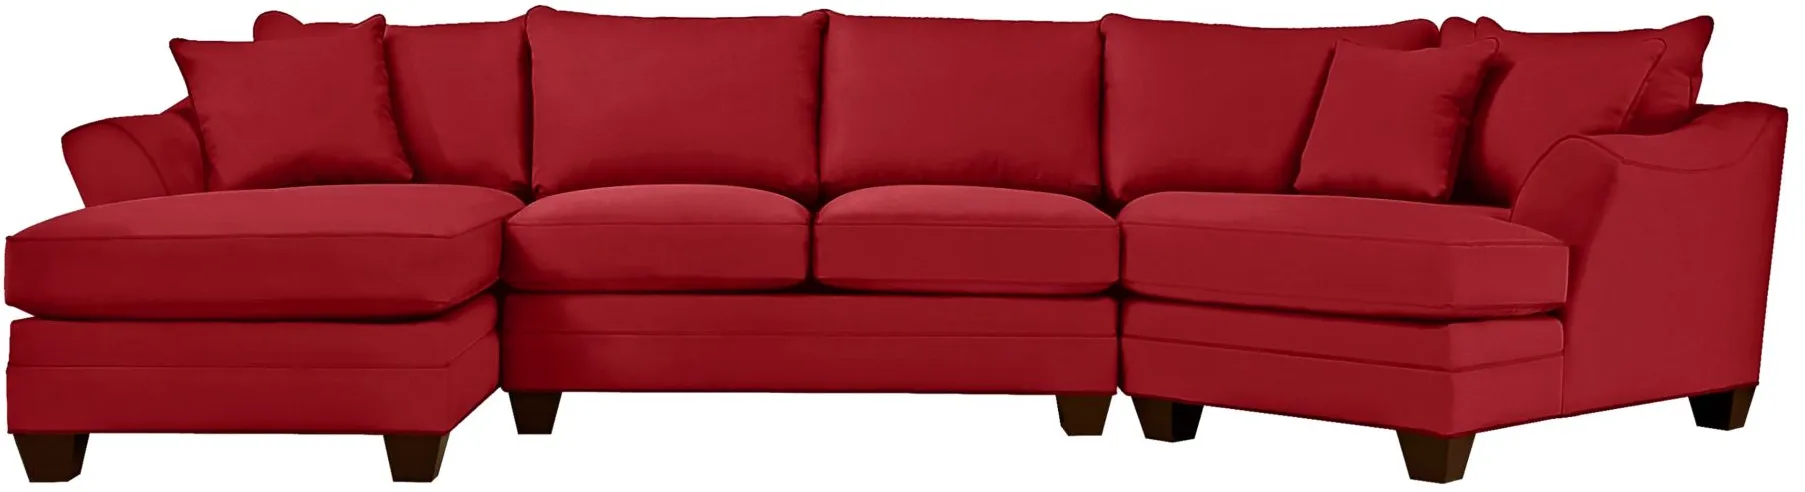 Foresthill 3-pc. Left Hand Facing Sectional Sofa in Suede So Soft Cardinal by H.M. Richards